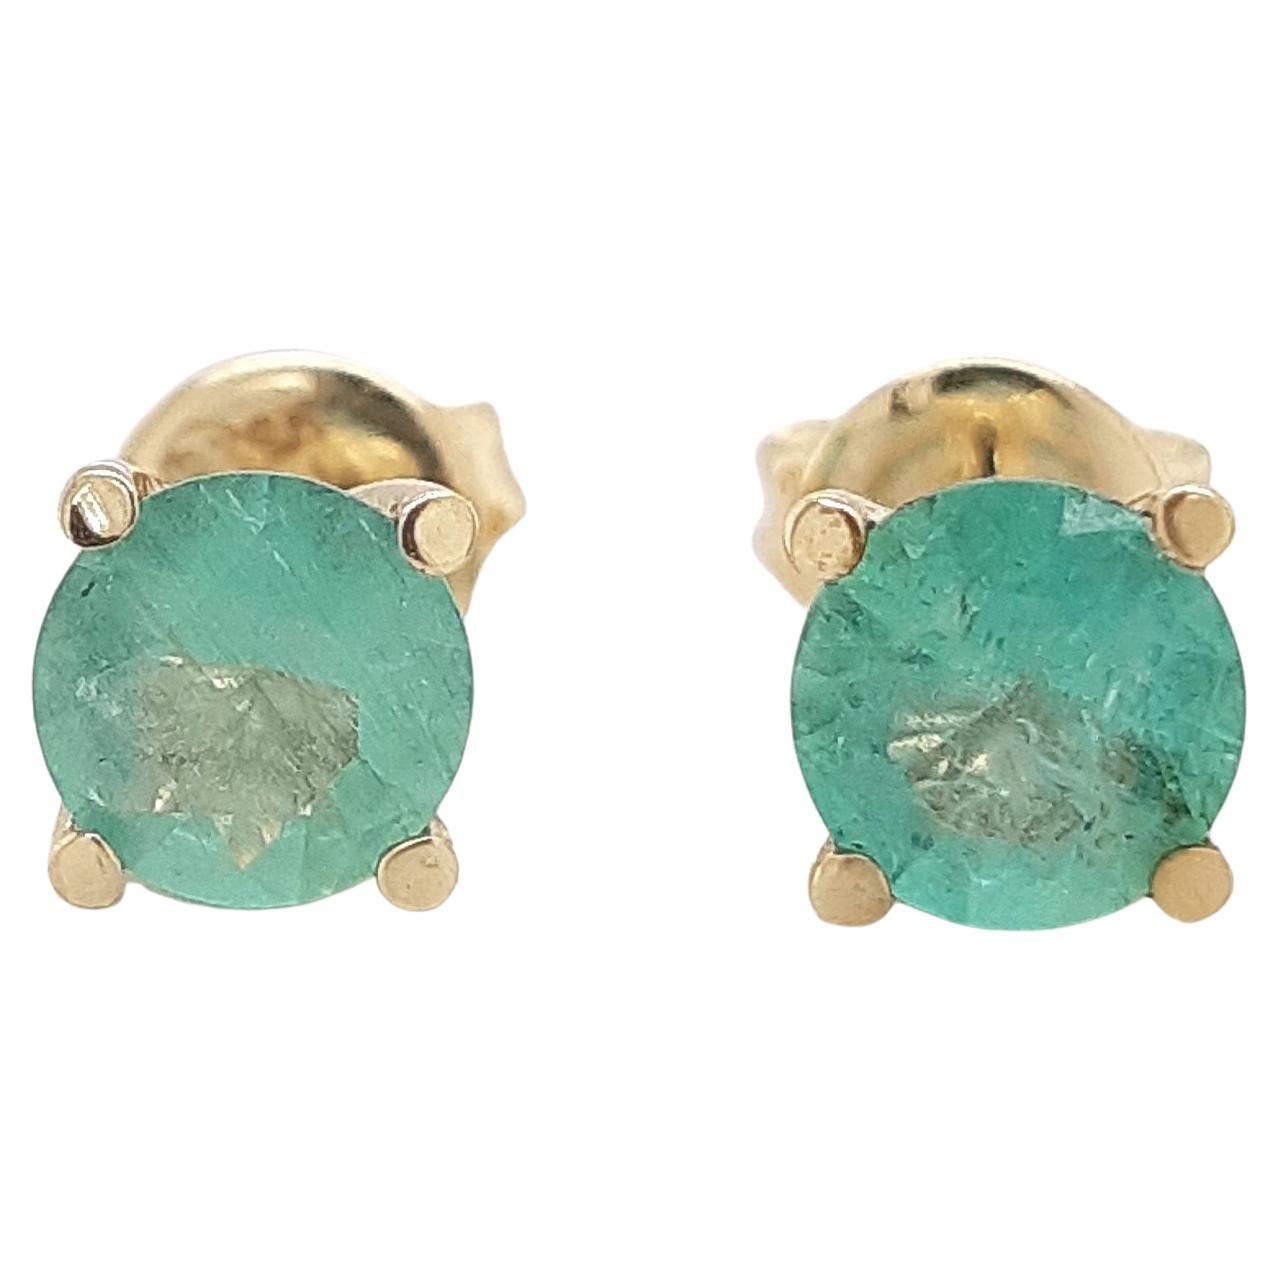 These stunning 14kt emerald stud earrings feature pair of natural round brilliant green emeralds weighing 1.00ct. in total. The earrings are simple, elegant, and classy and its green color gives it a lively look. 
For more information, please check